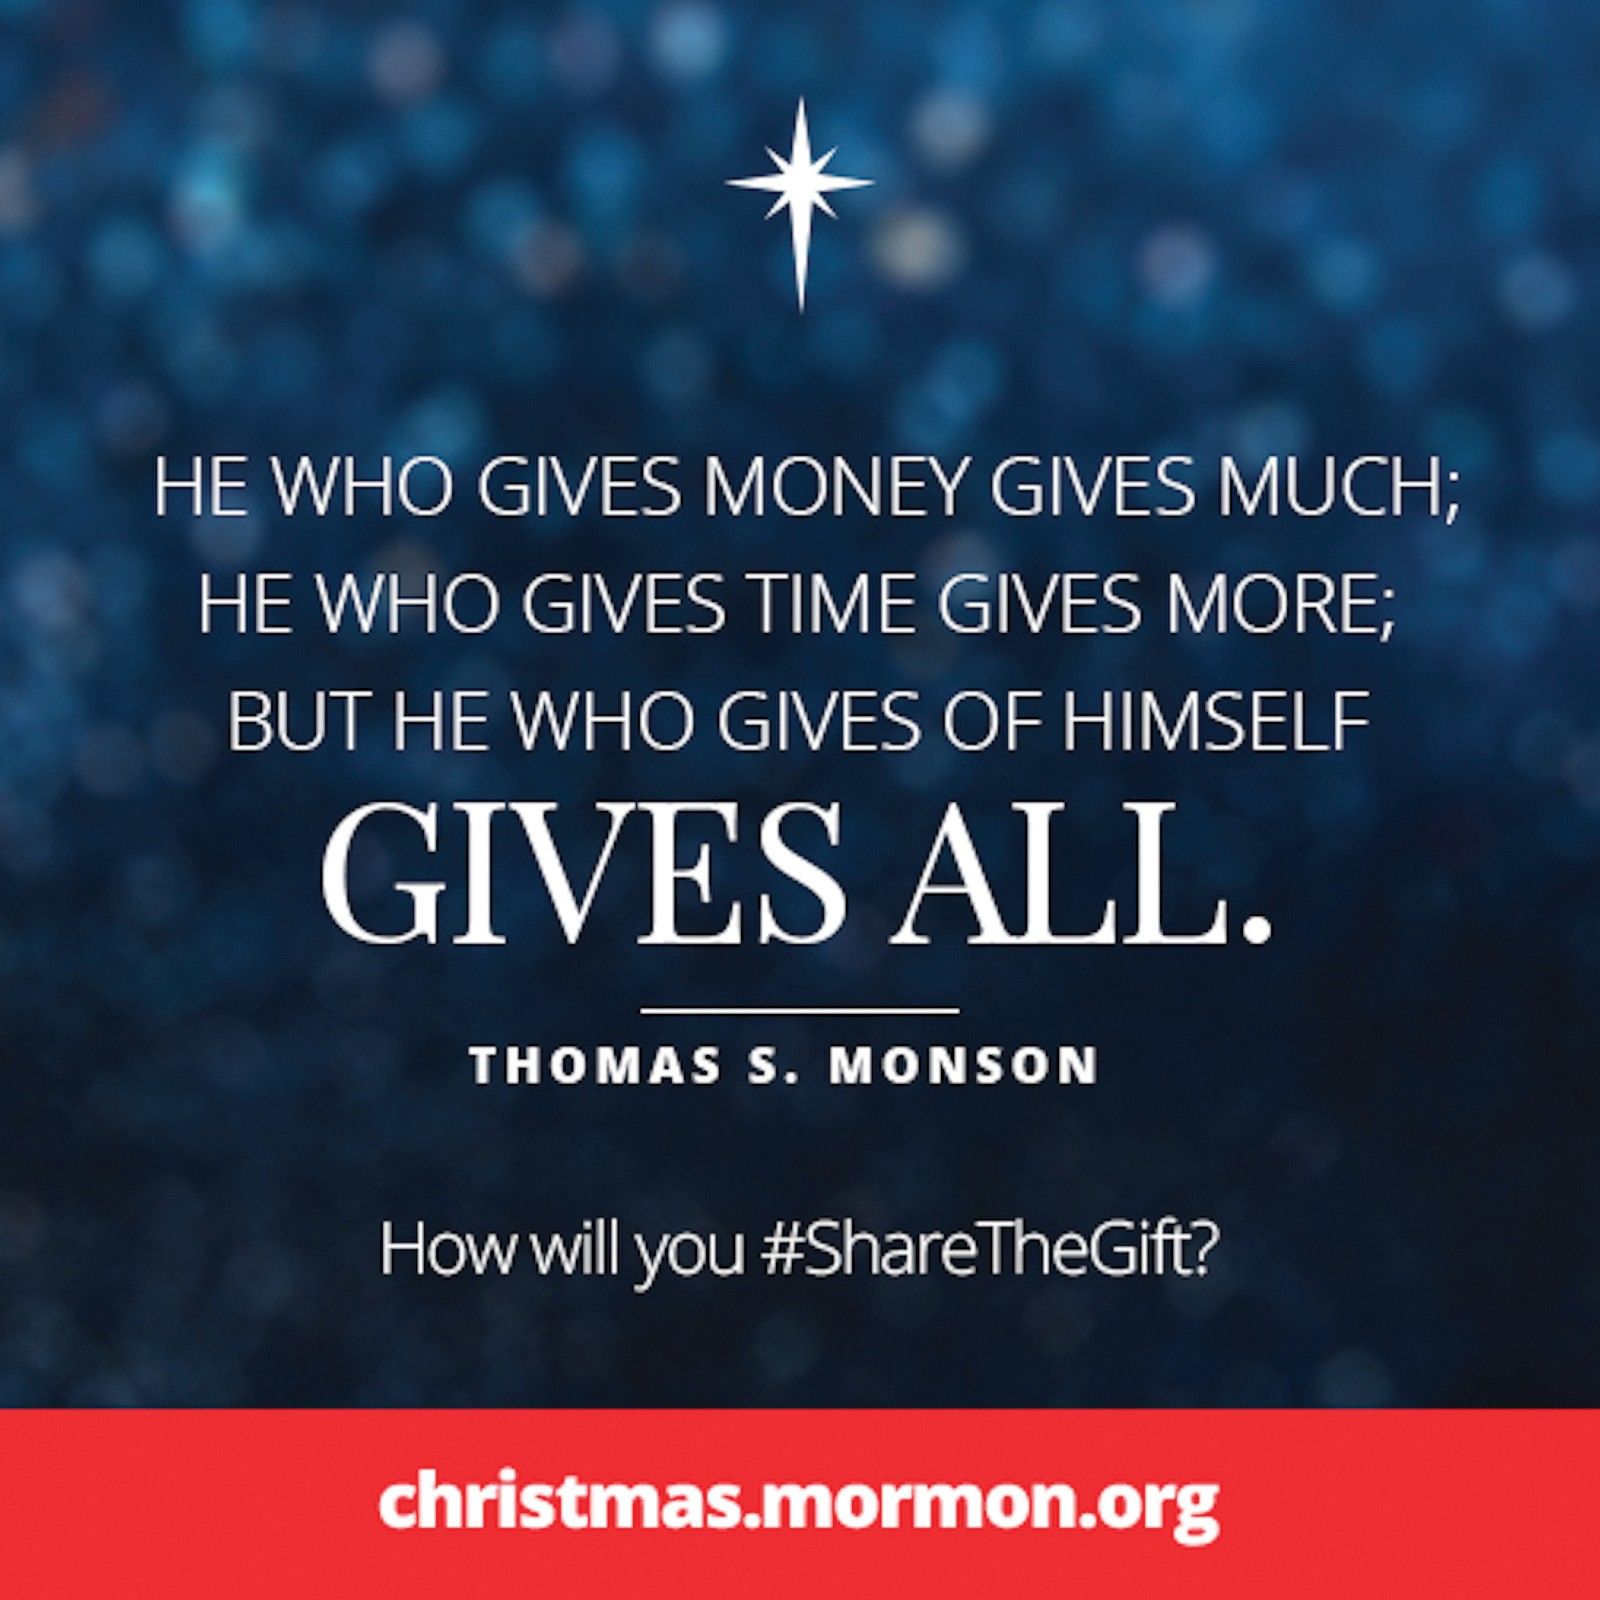 “He who gives money gives much; he who gives time gives more; but he who gives of himself gives all.”—President Thomas S. Monson, “Christmas Is Love”